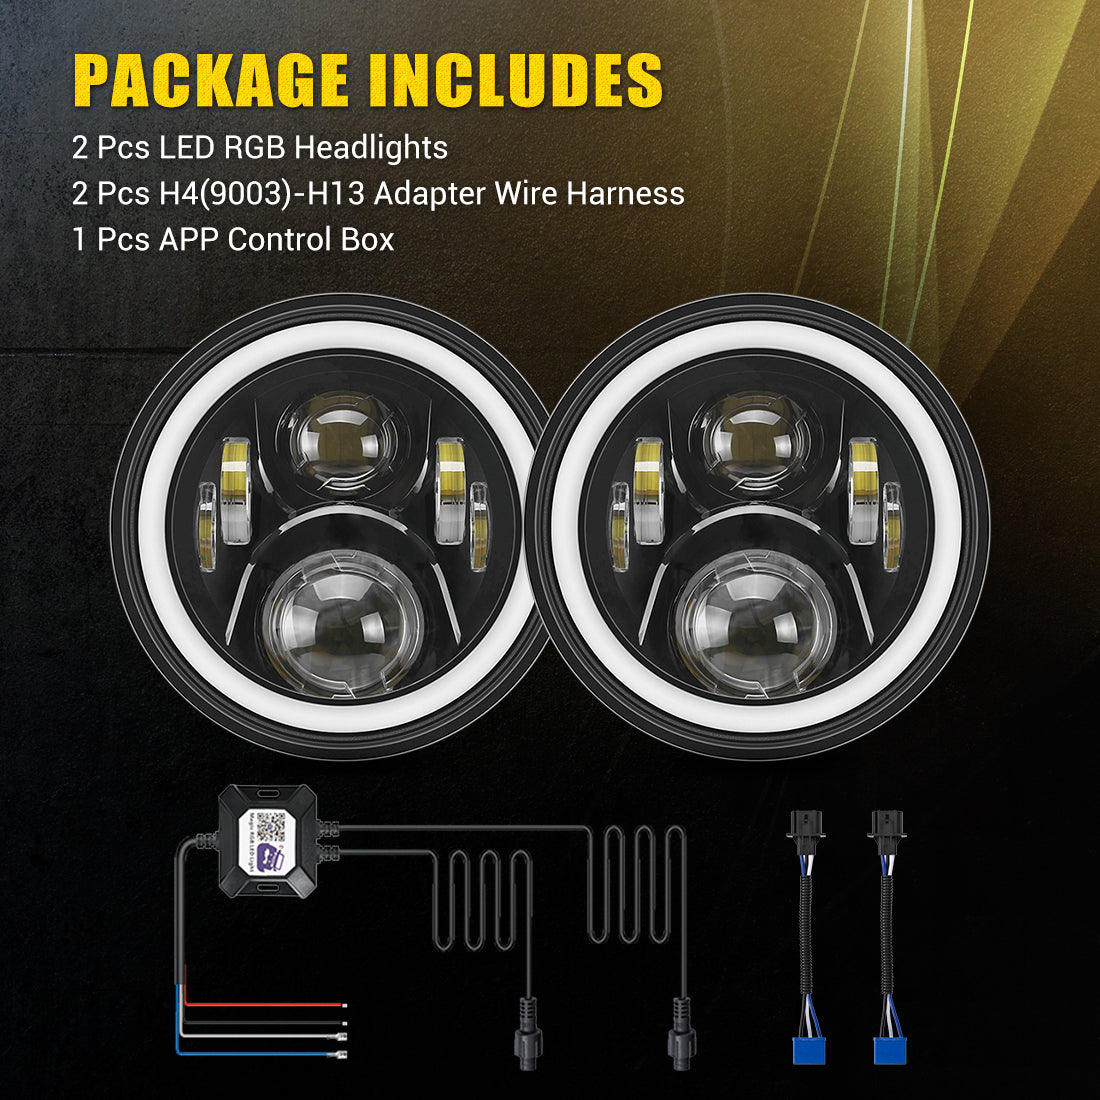 Jeep LED RGB Headlights Package Include